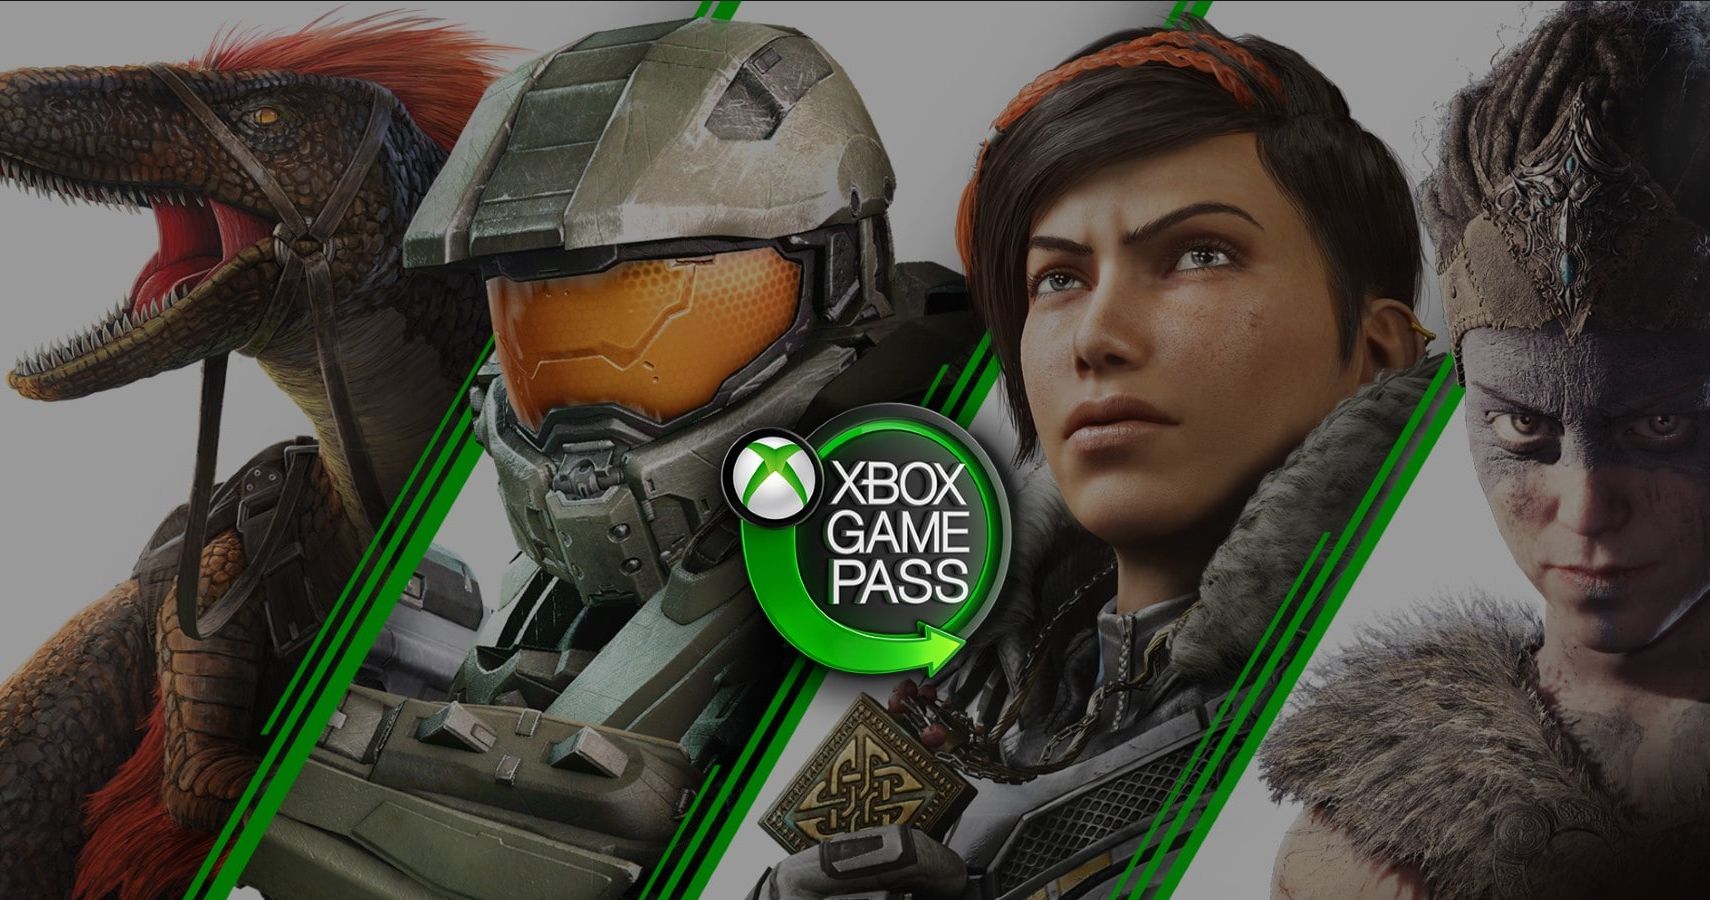 gamepass promo shot with four MS characters as the background including master chief.